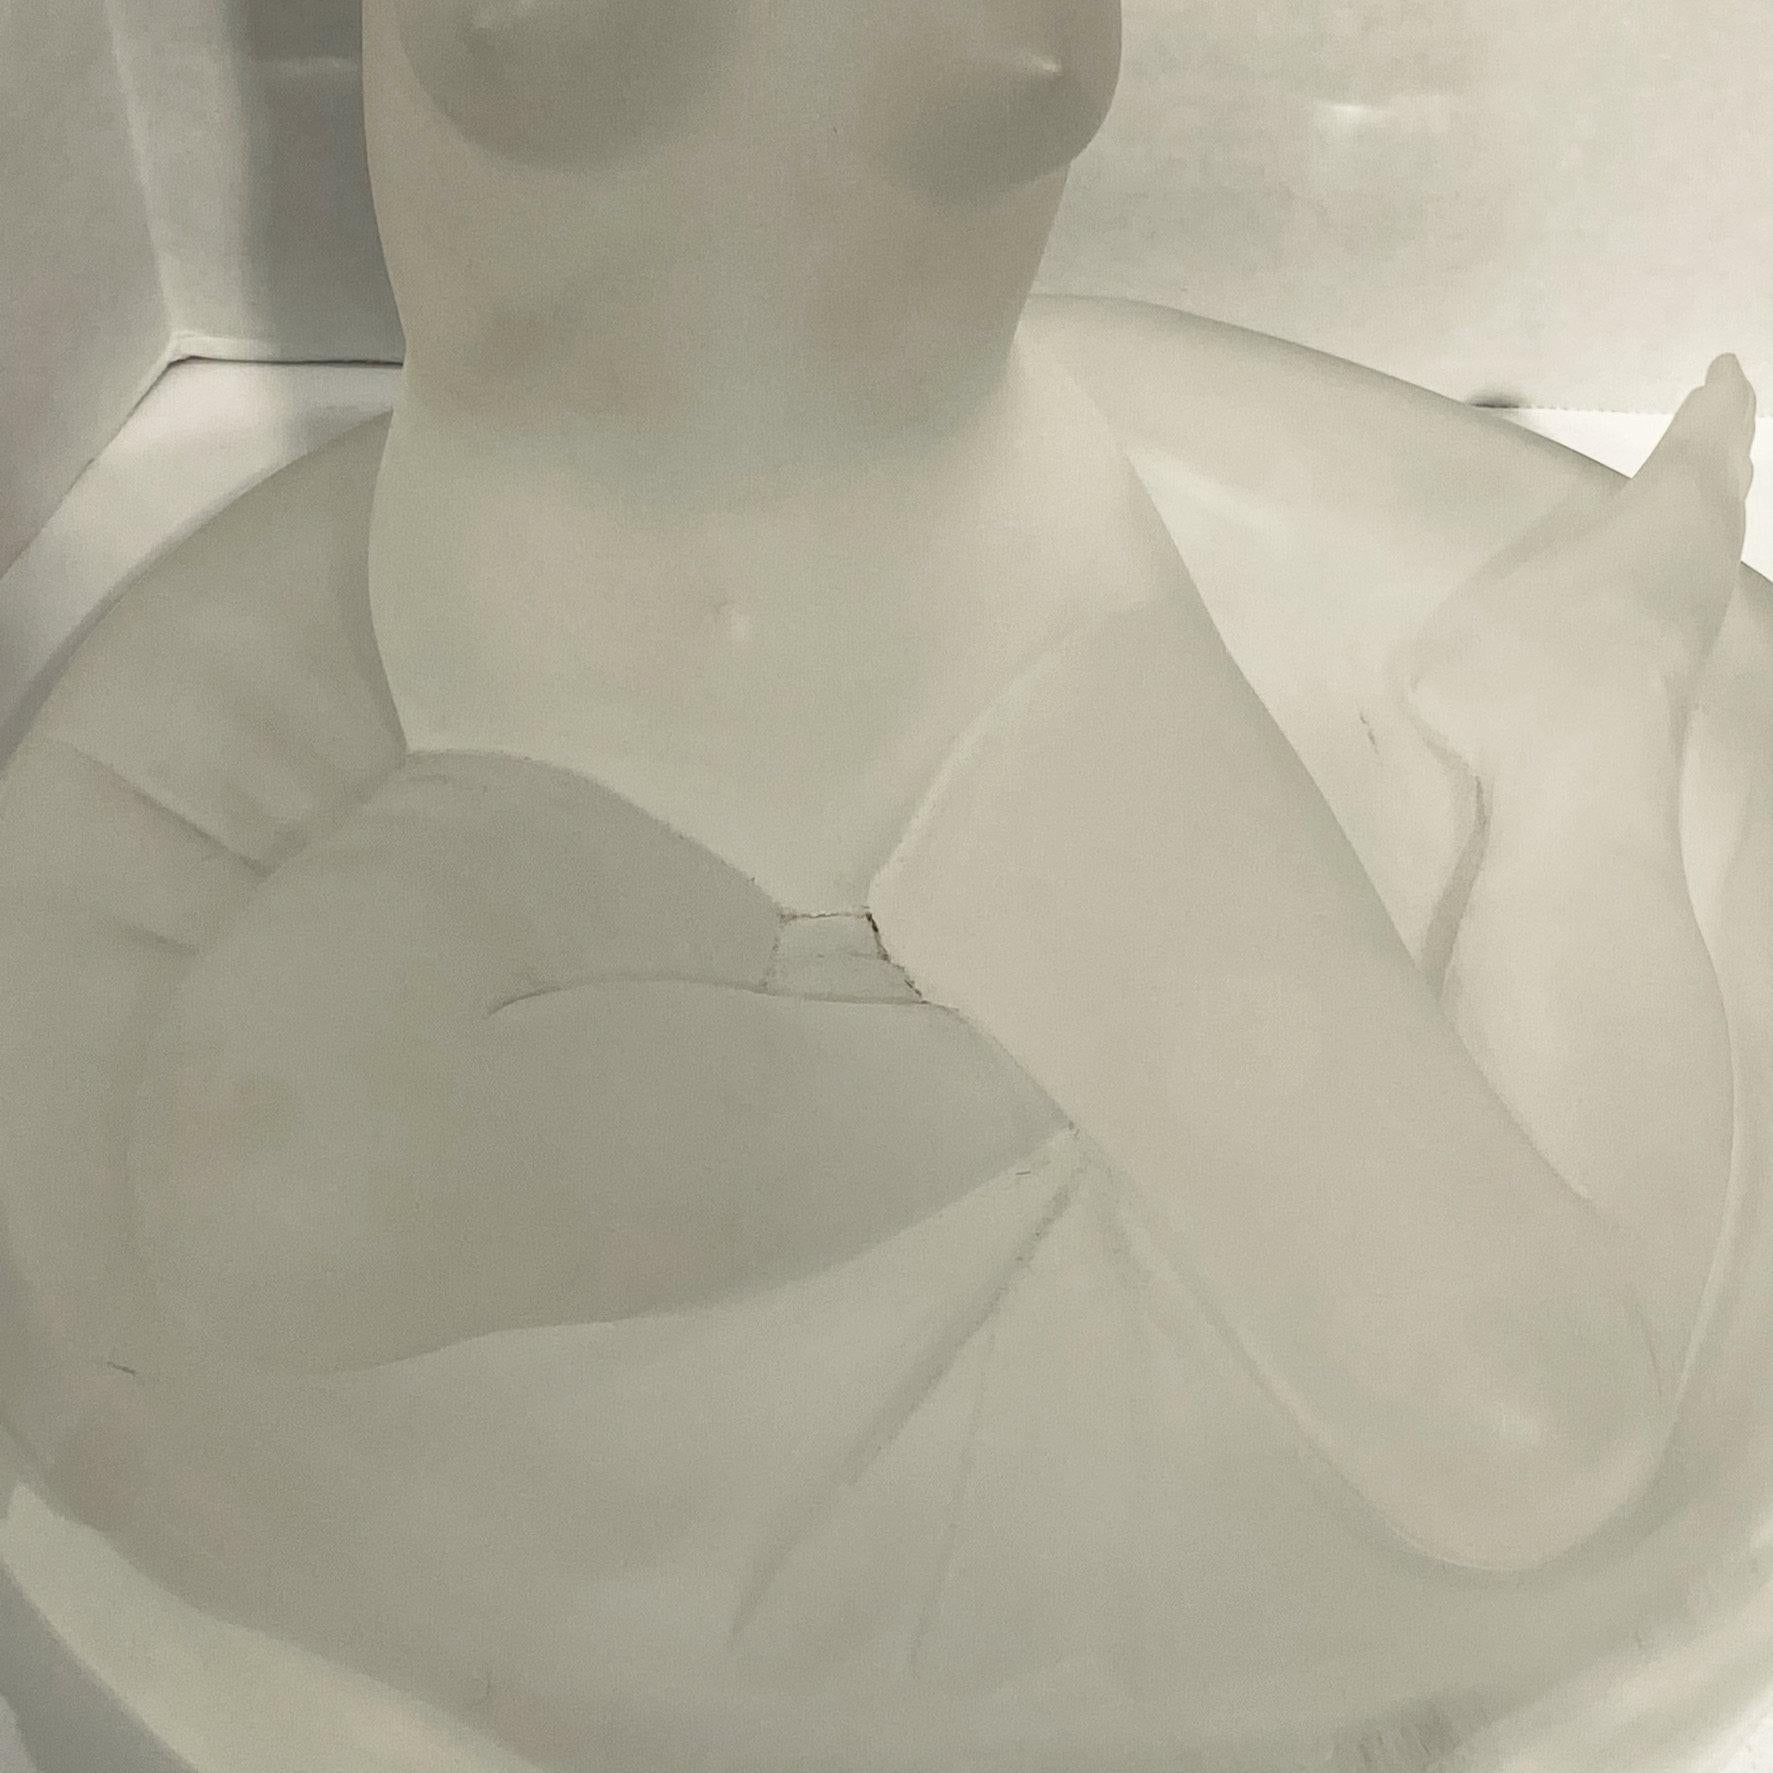 Nude Seated Female Lucite Sculpture In Good Condition For Sale In New York, NY